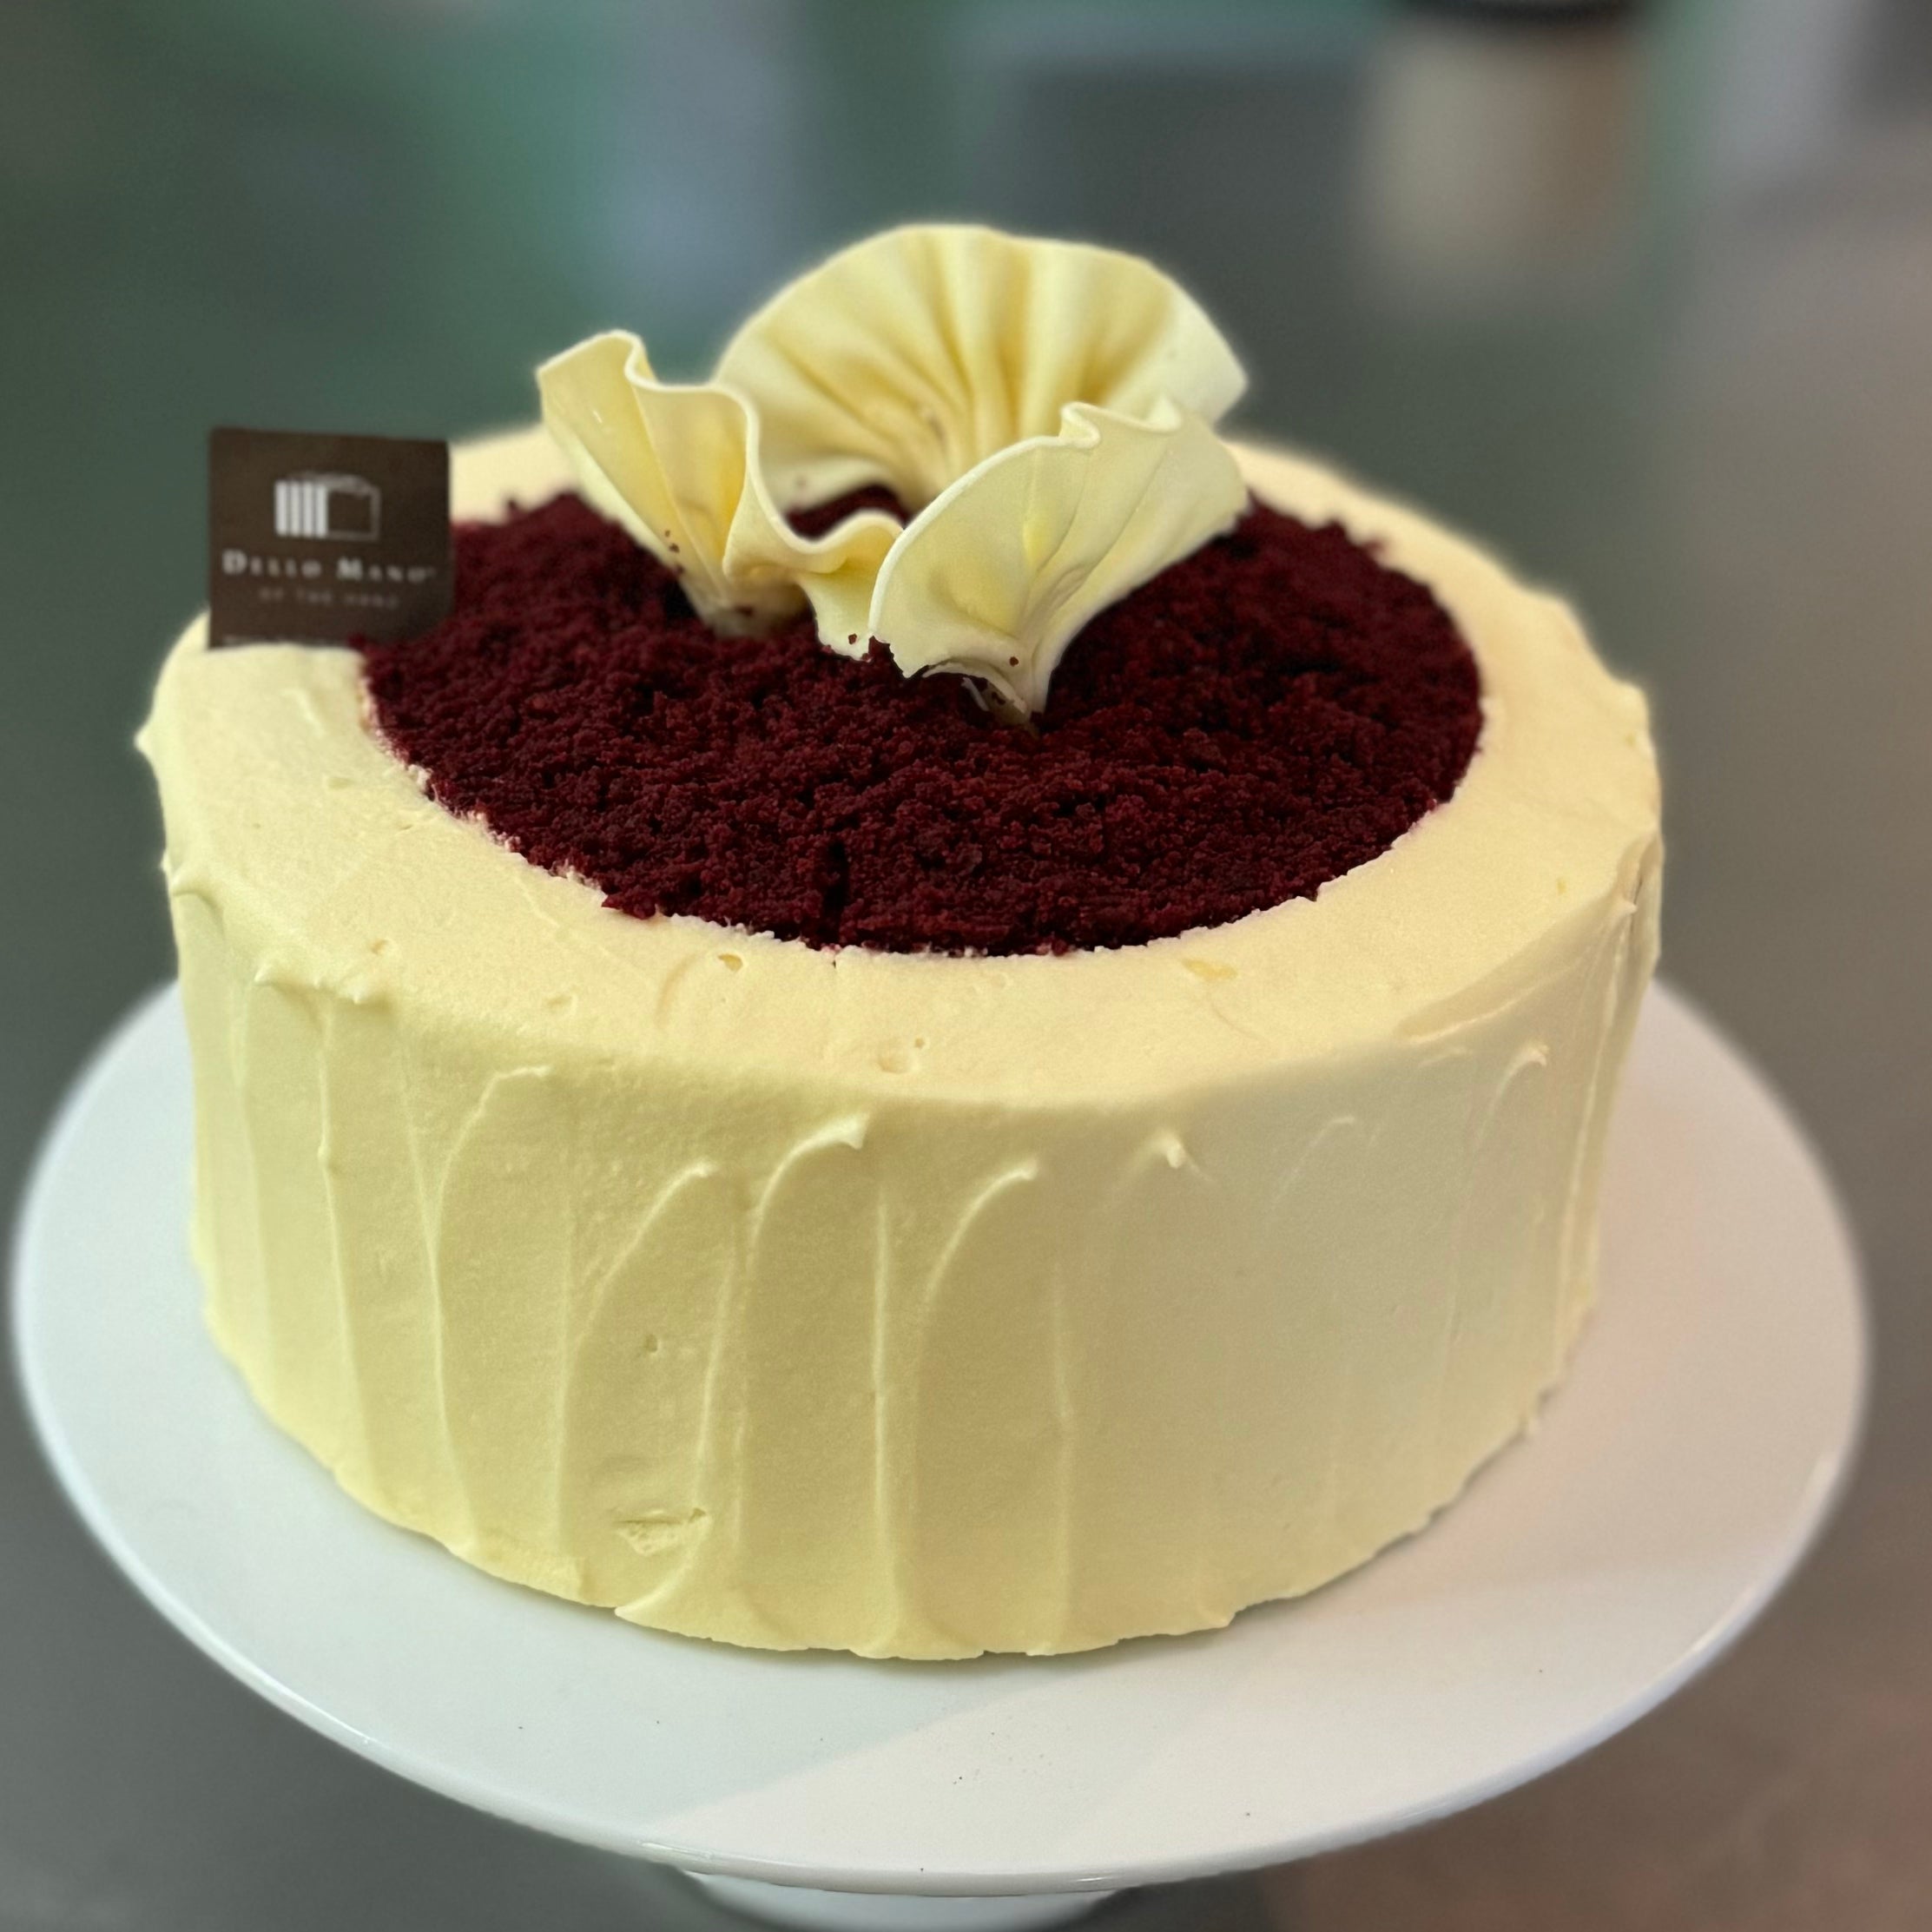 A view of the Red Velvet Cake with 3 White Chocolate handmade fans and red crumbs on top